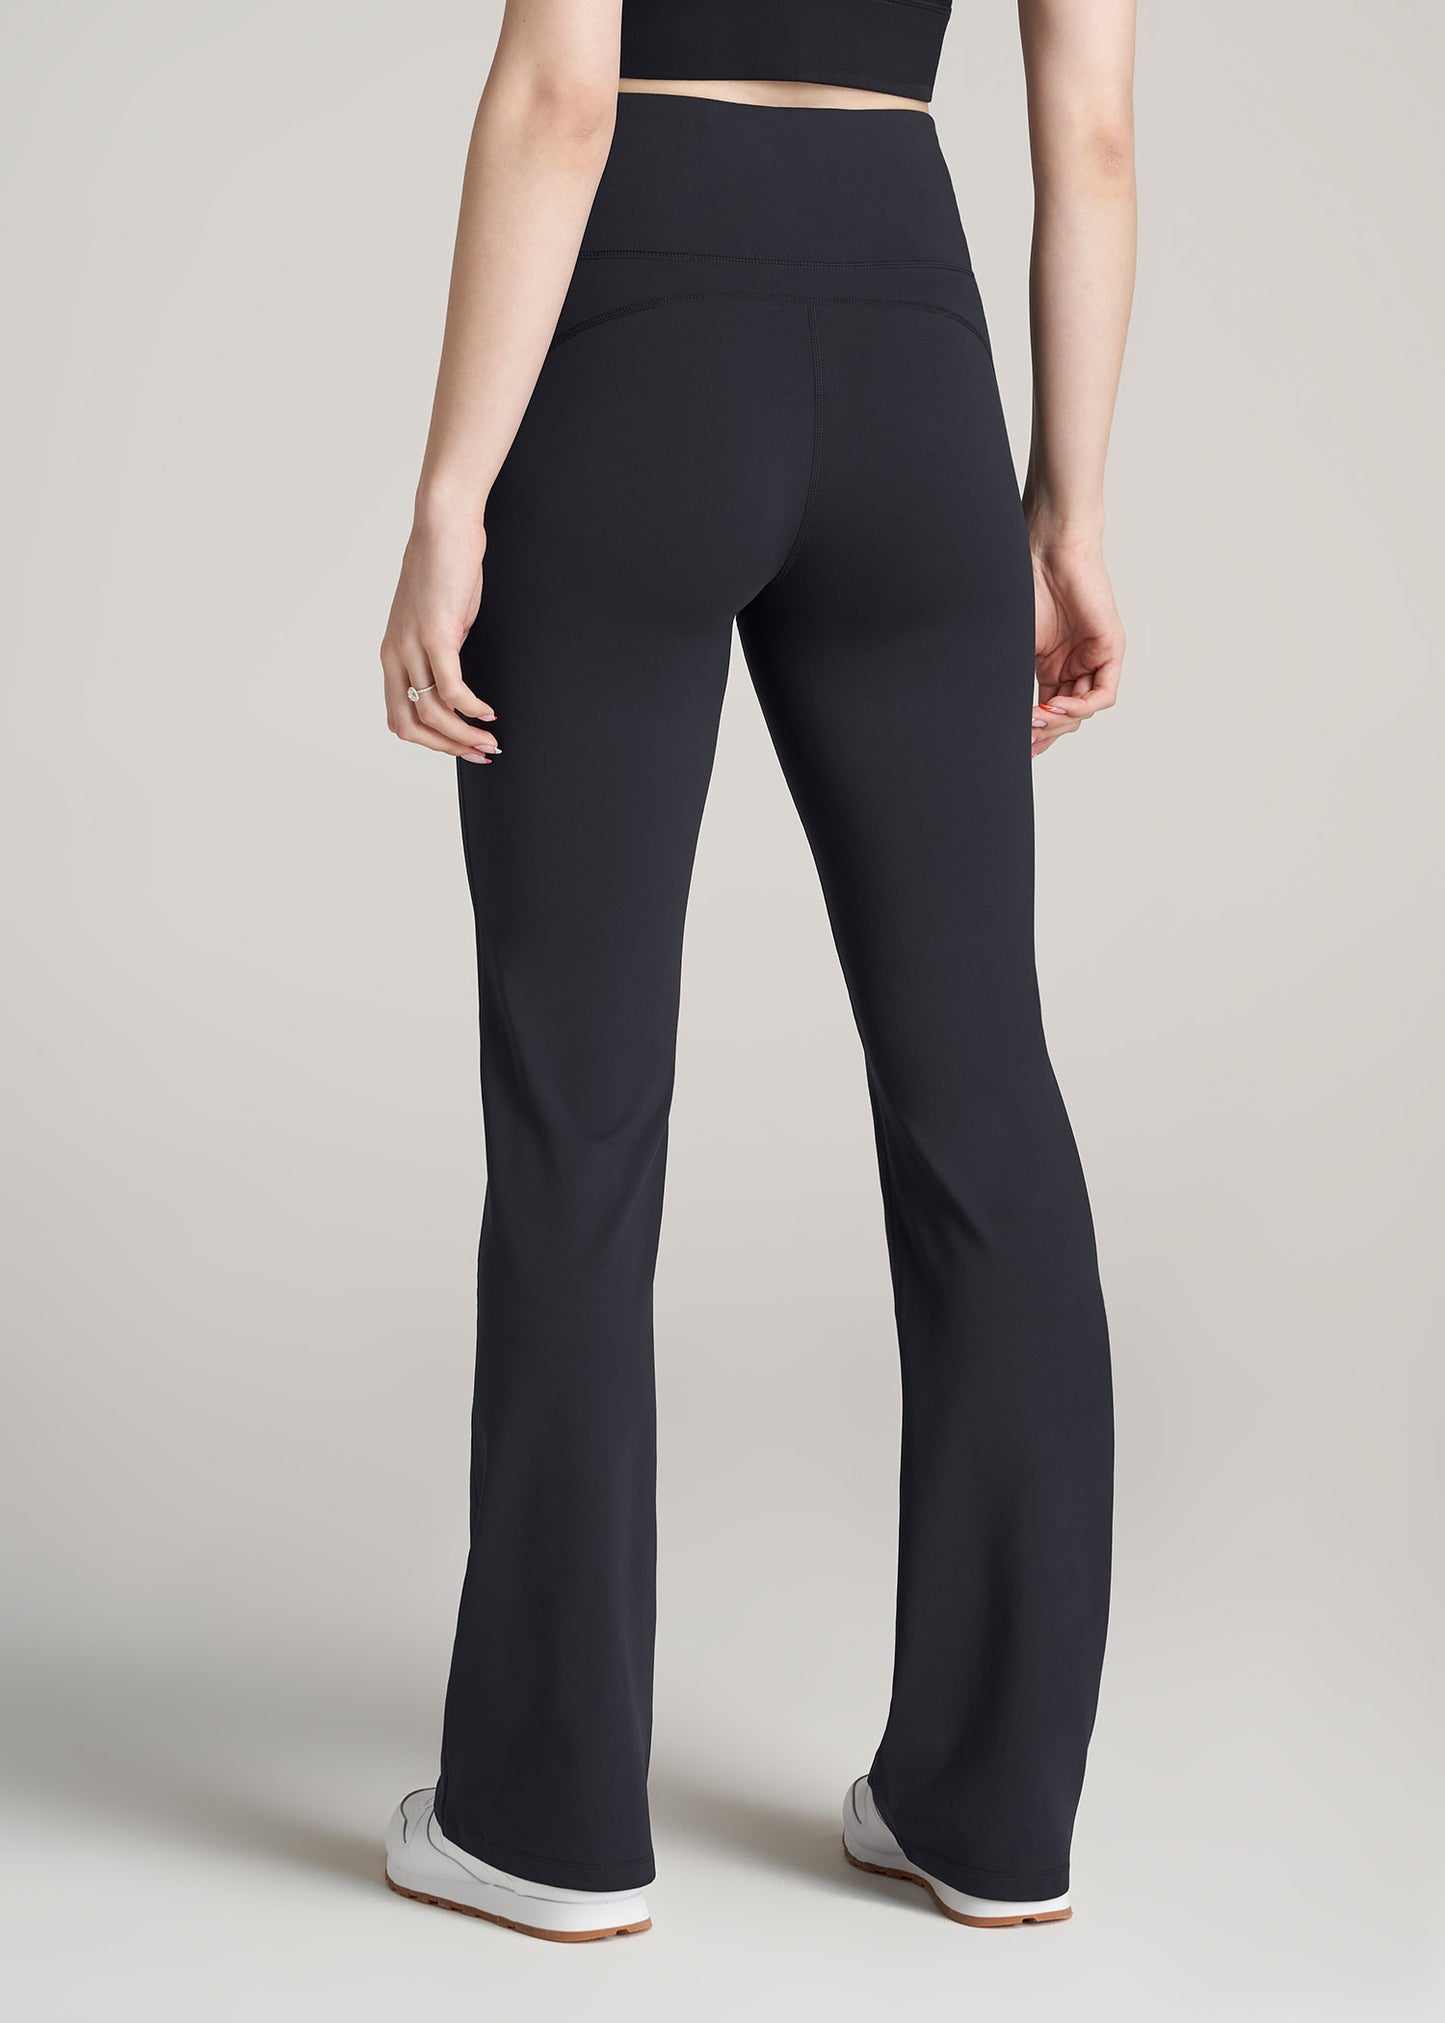 I'm Swapping My Leggings for the Lululemon Mini-Flared Pants